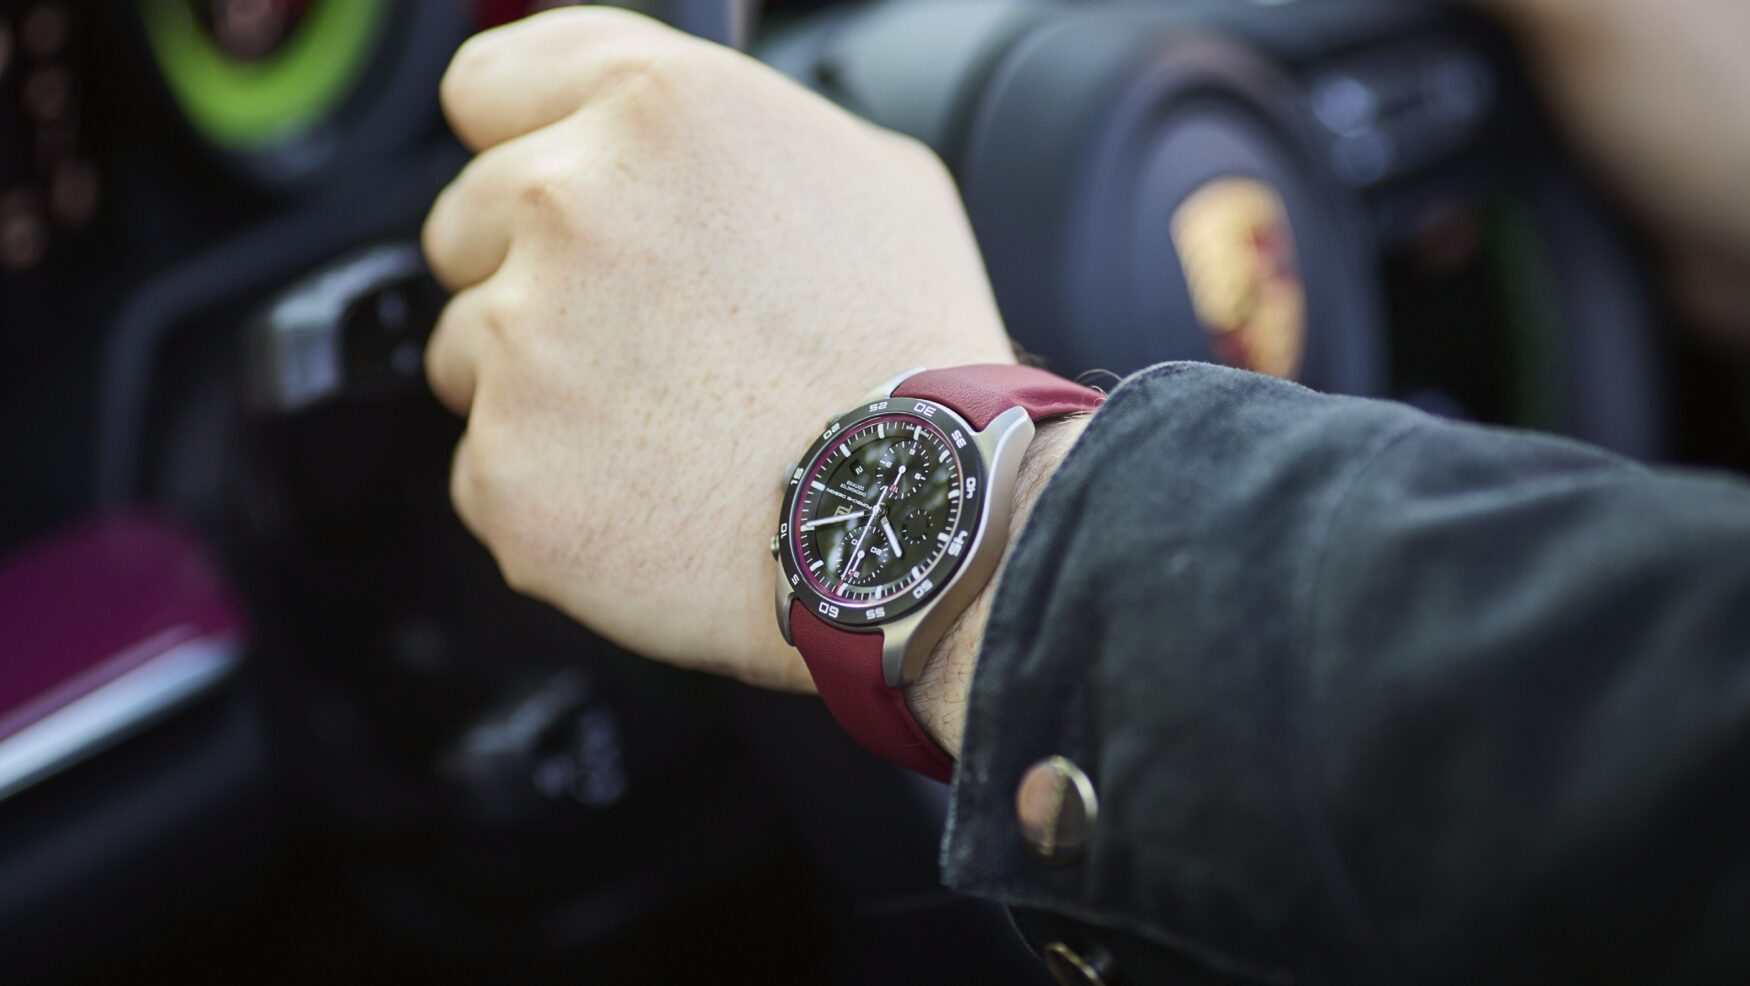 Porsche Design’s Custom-Built Chronograph brings the luxury car optioning experience to the world of watches